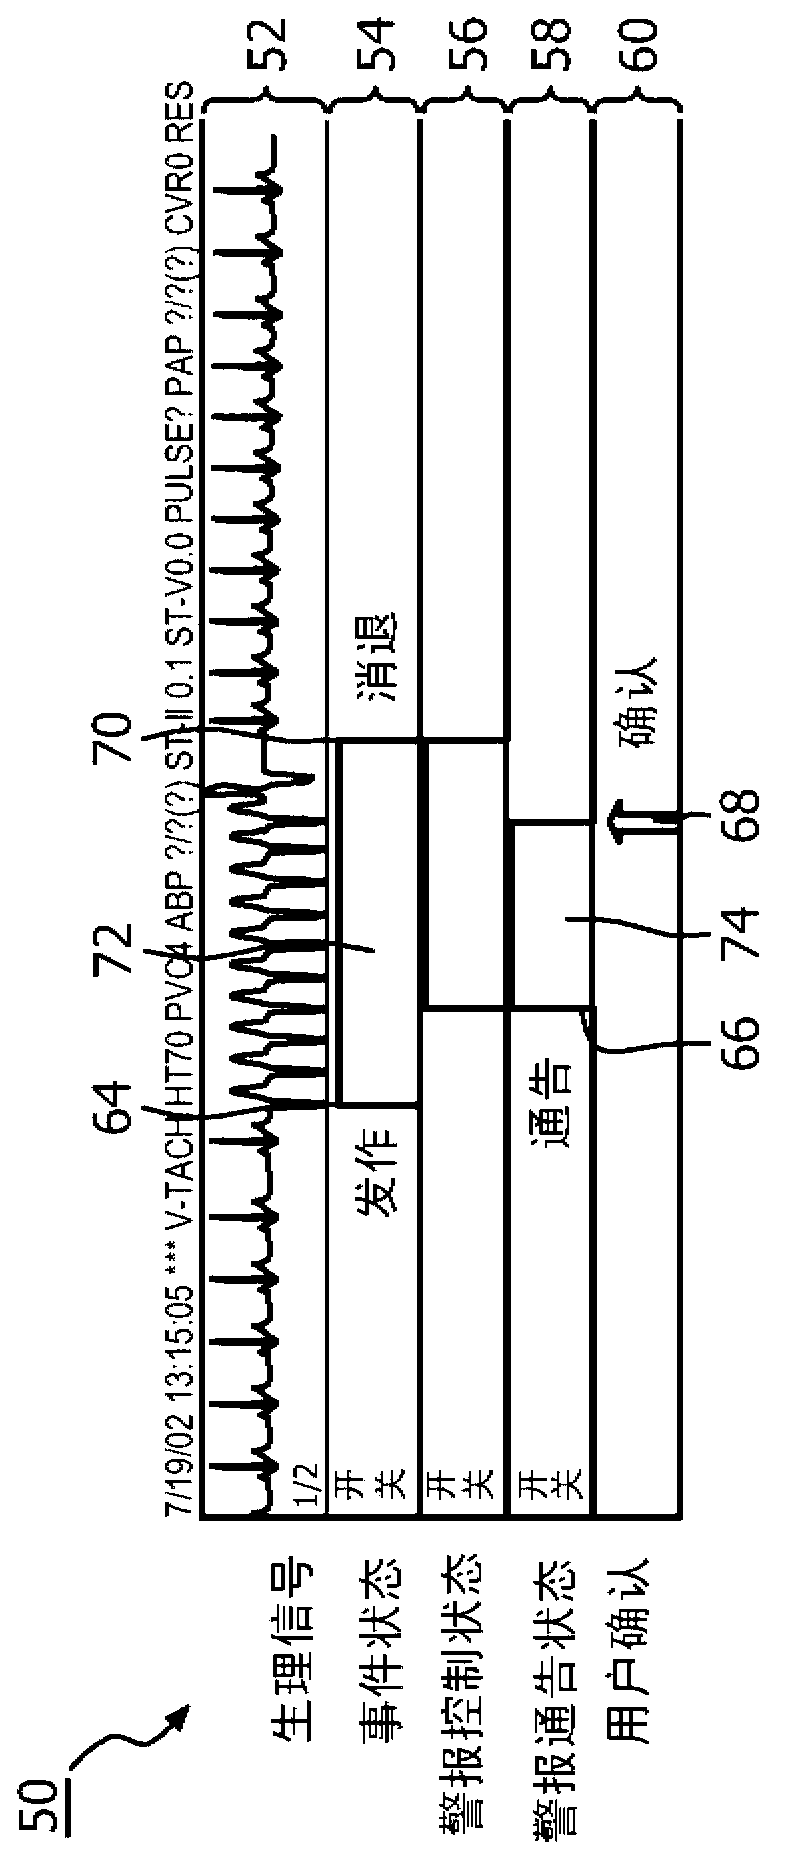 Method for display and navigation to clinical events